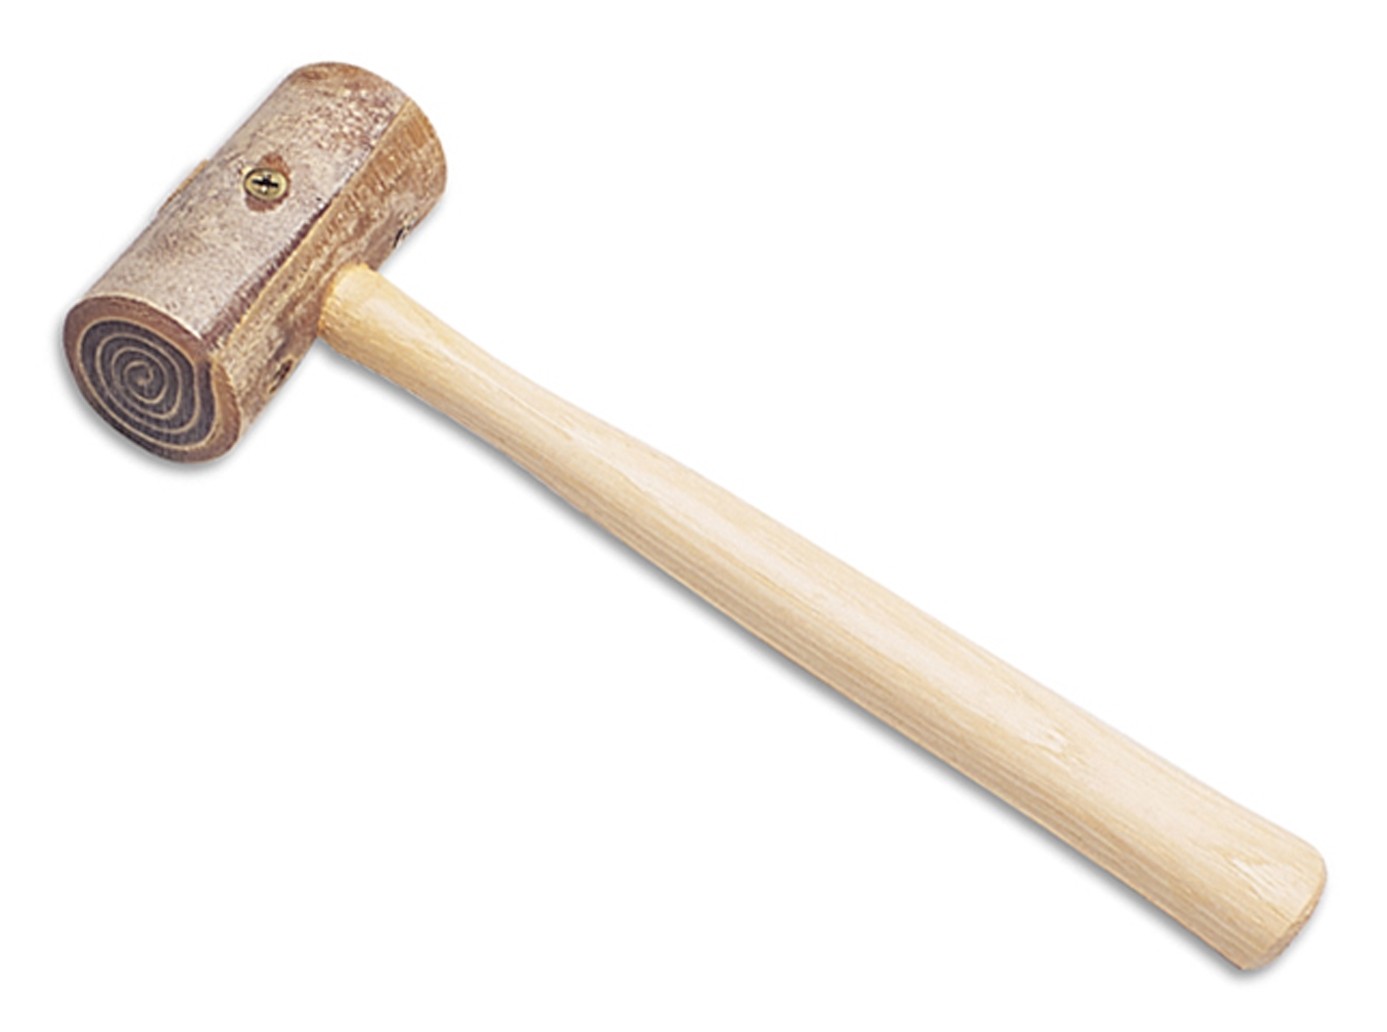 DRM11 2 Rawhide Mallet for metal working